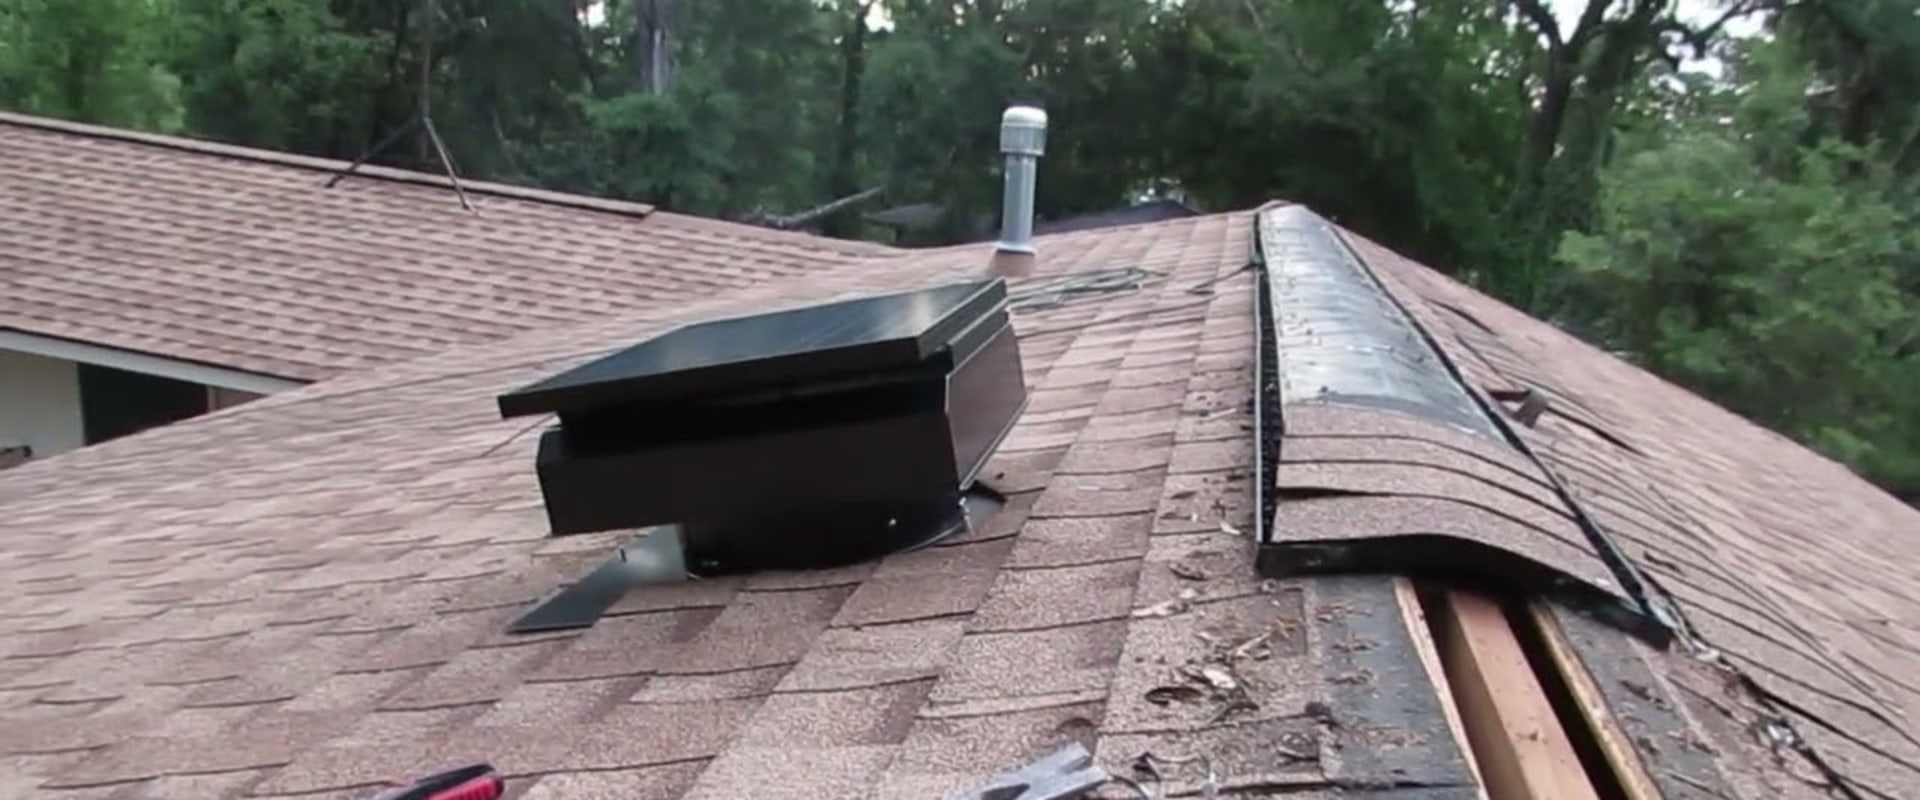 Are there any special considerations when installing solar attic vents on my ridge?